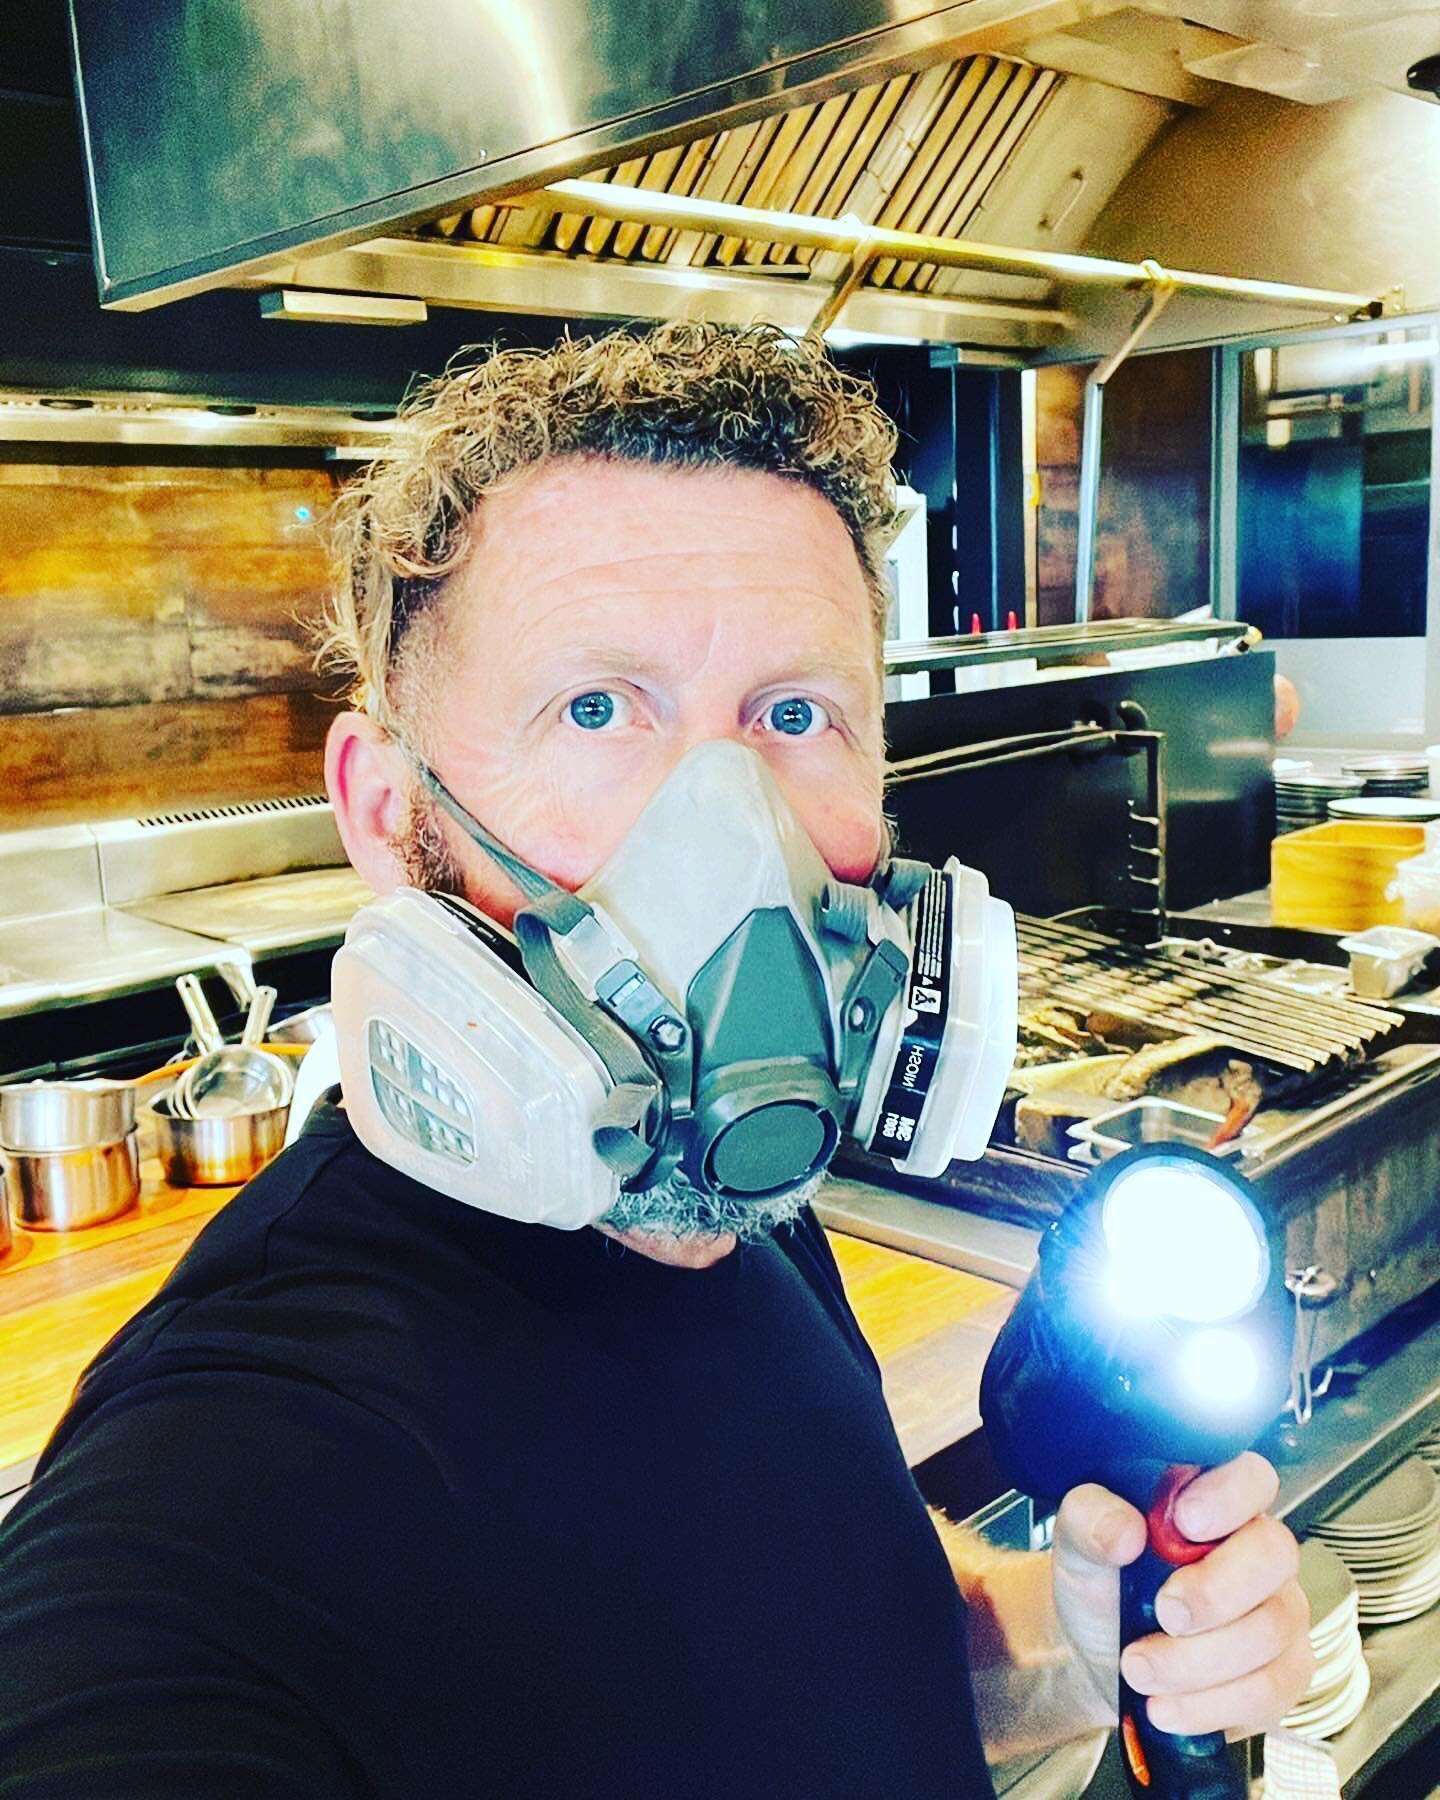 Preemptive check for any evidence of insect activity within a commercial kitchen - using crack n crevice sprays and a good flashlight - we pull out appliances and 👀in the darkest spots #propest #propest_nz #aucklandfoodcontrolplan #commercialkitchen